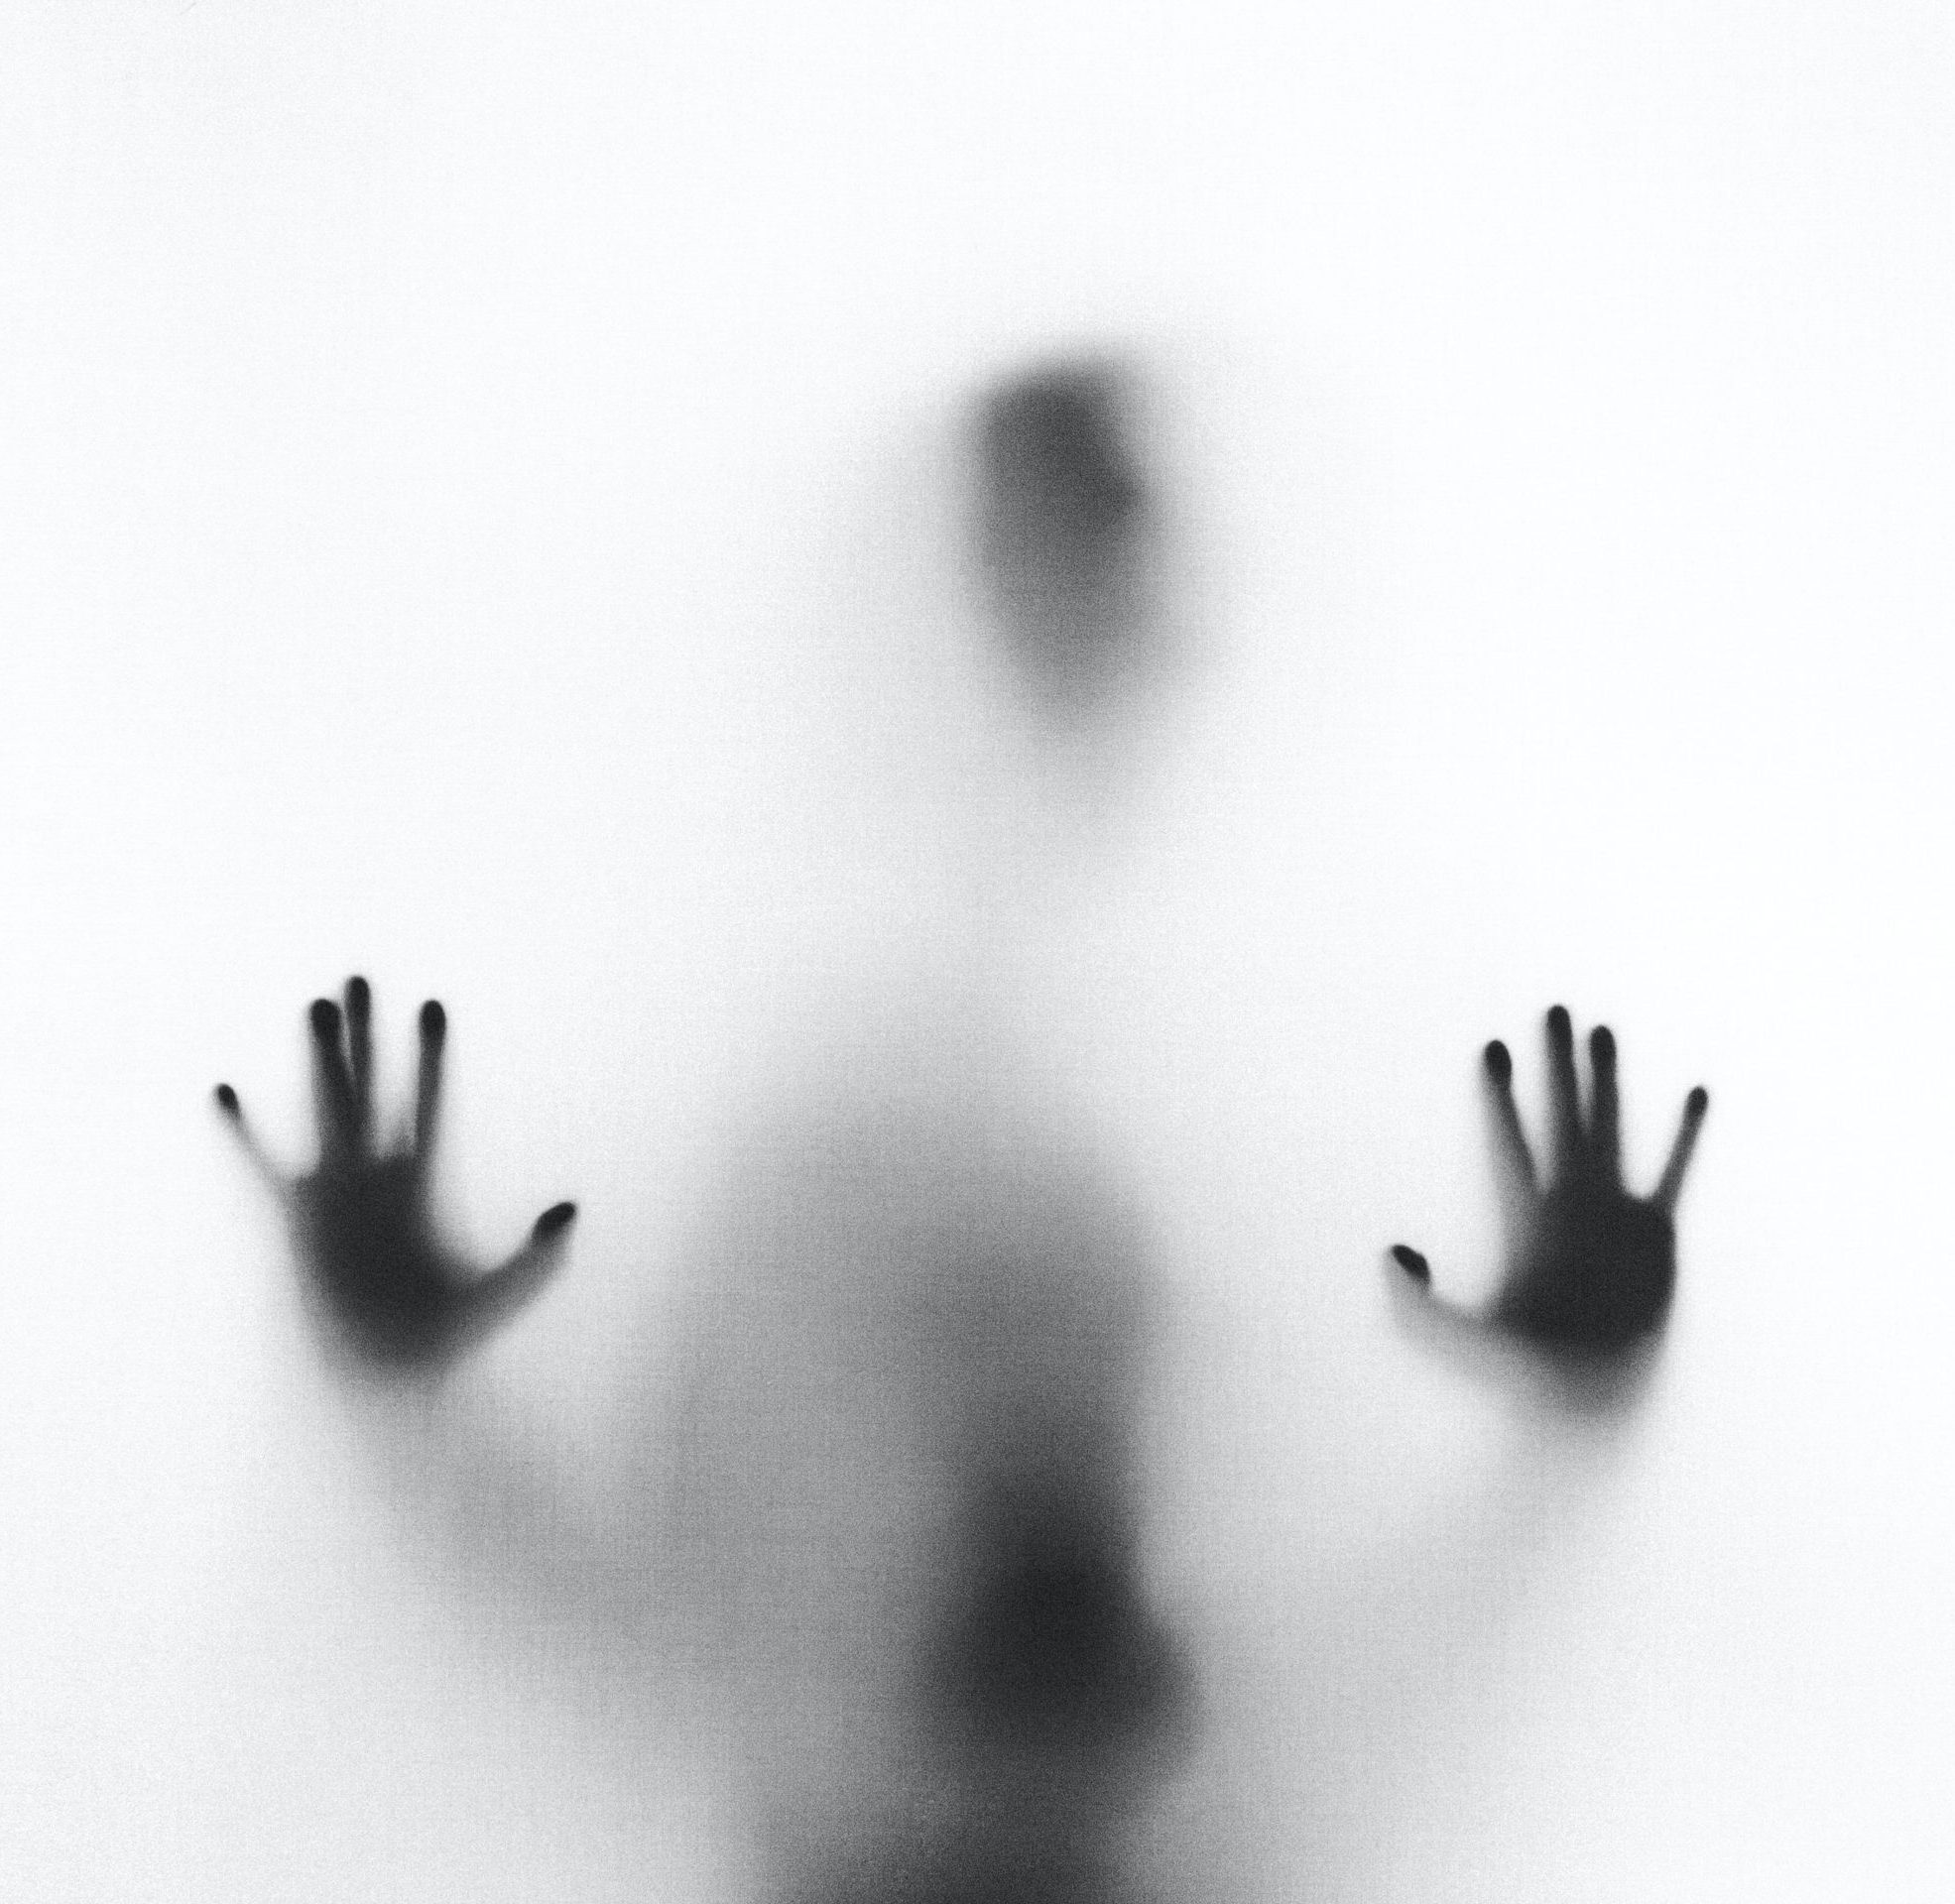 A shadowy figure presses its hands against a translucent fabric